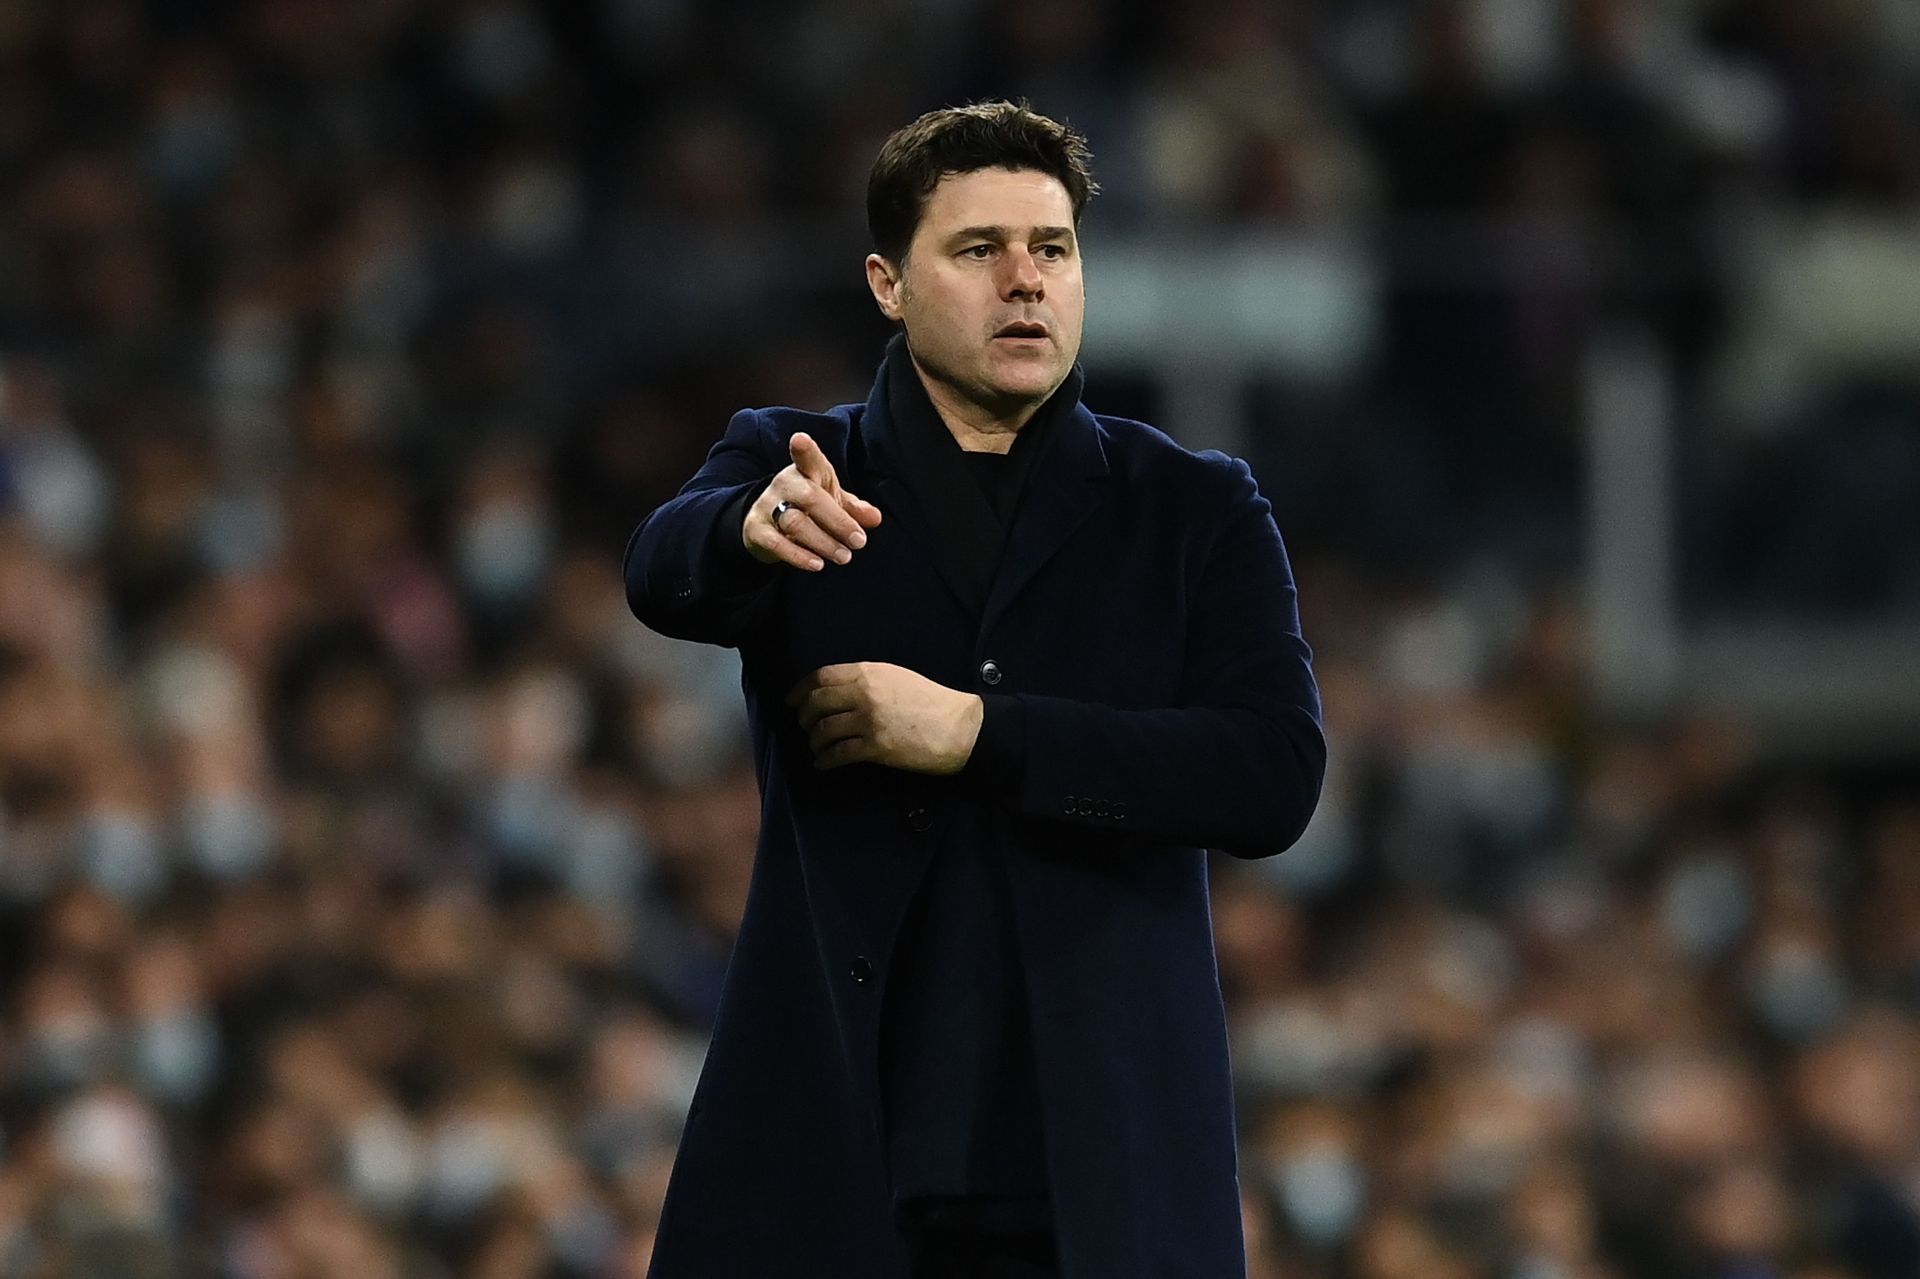 Mauricio Pochettino is set to be announced as the new Chelsea manager.